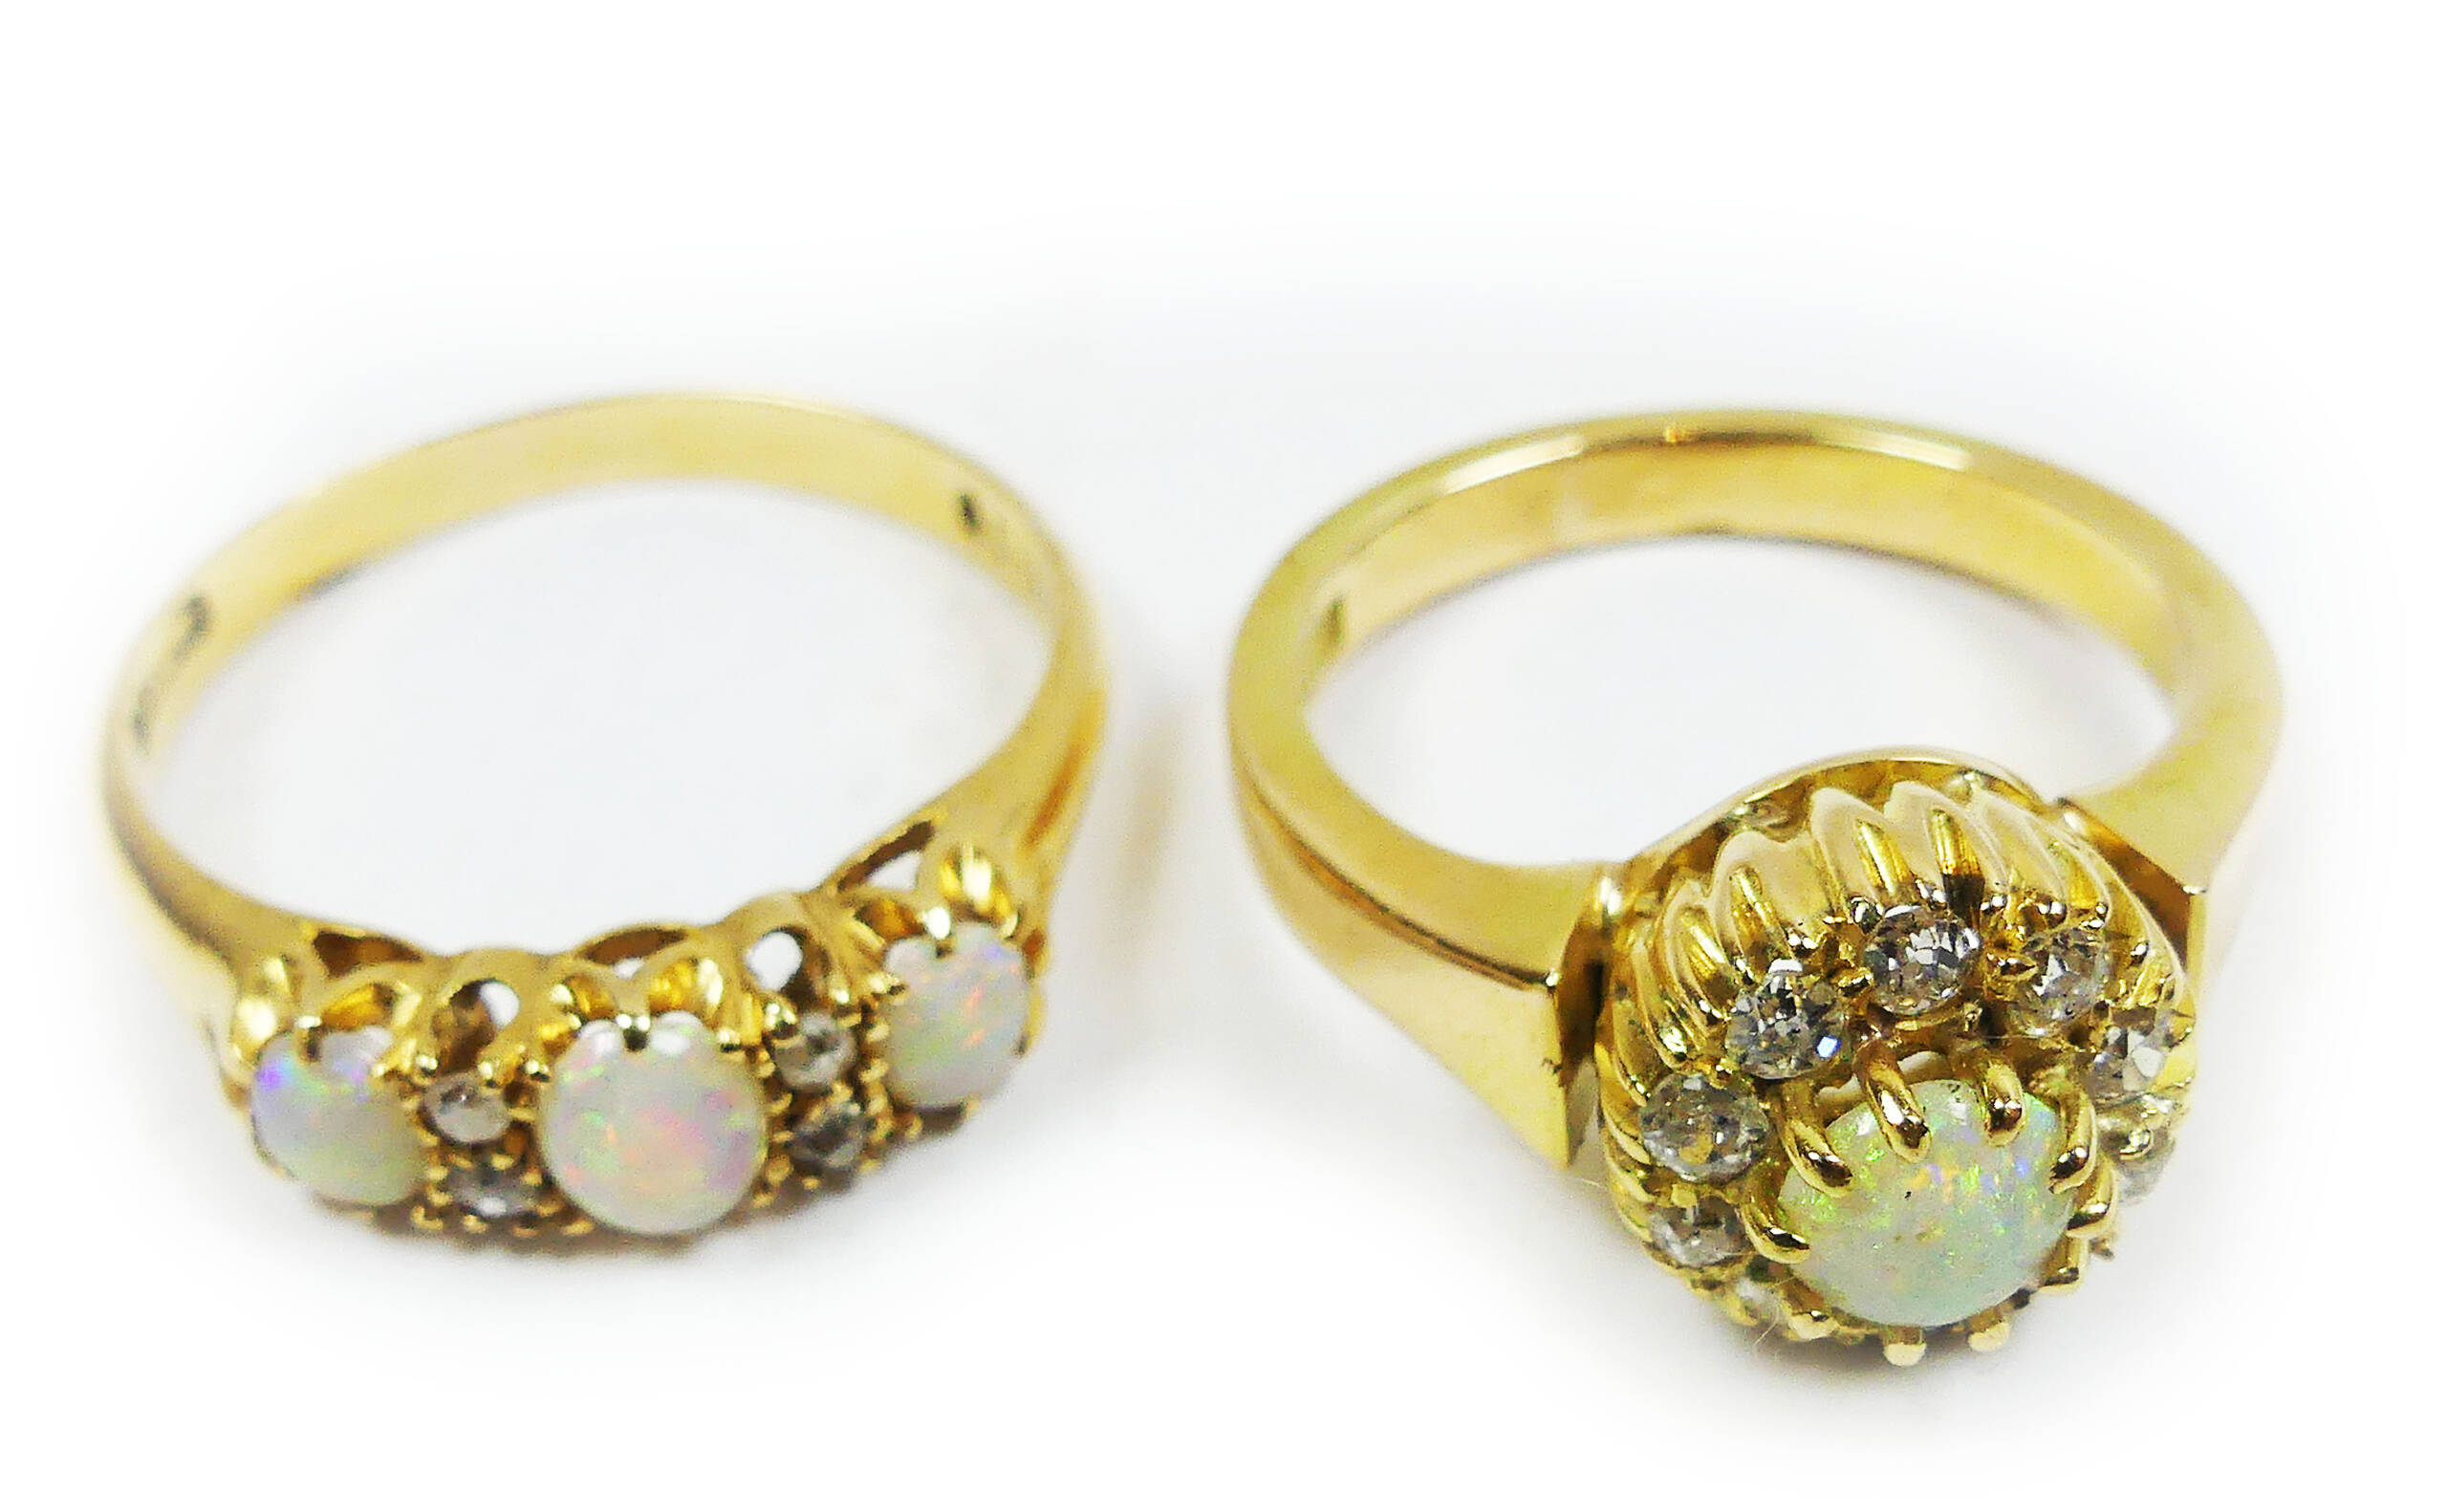 Two Opal and Damond Ring